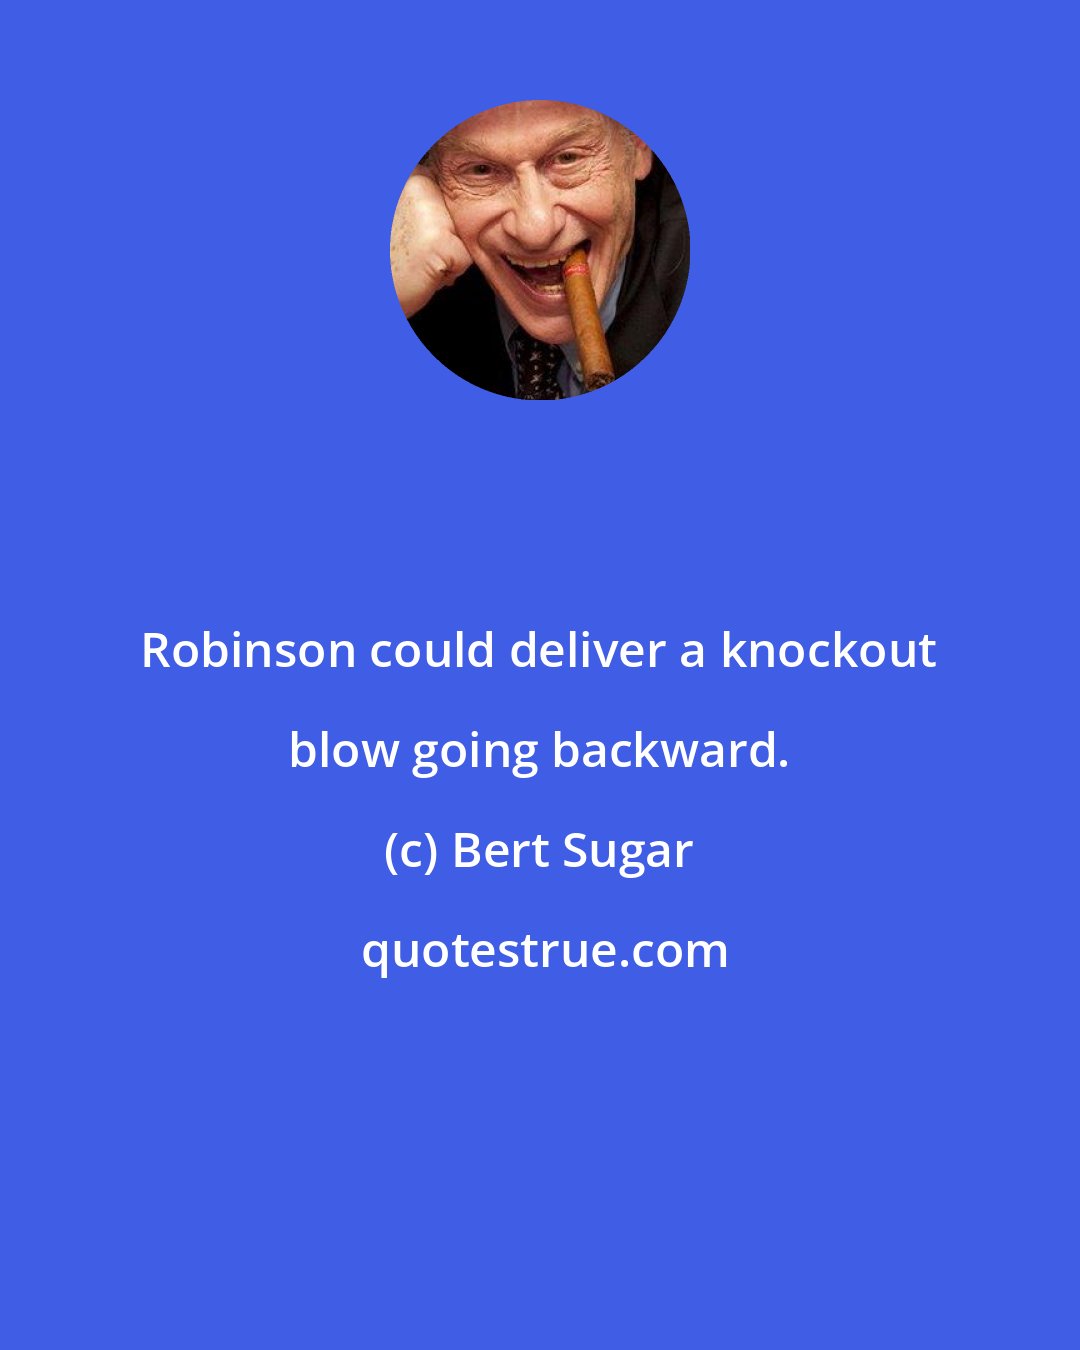 Bert Sugar: Robinson could deliver a knockout blow going backward.